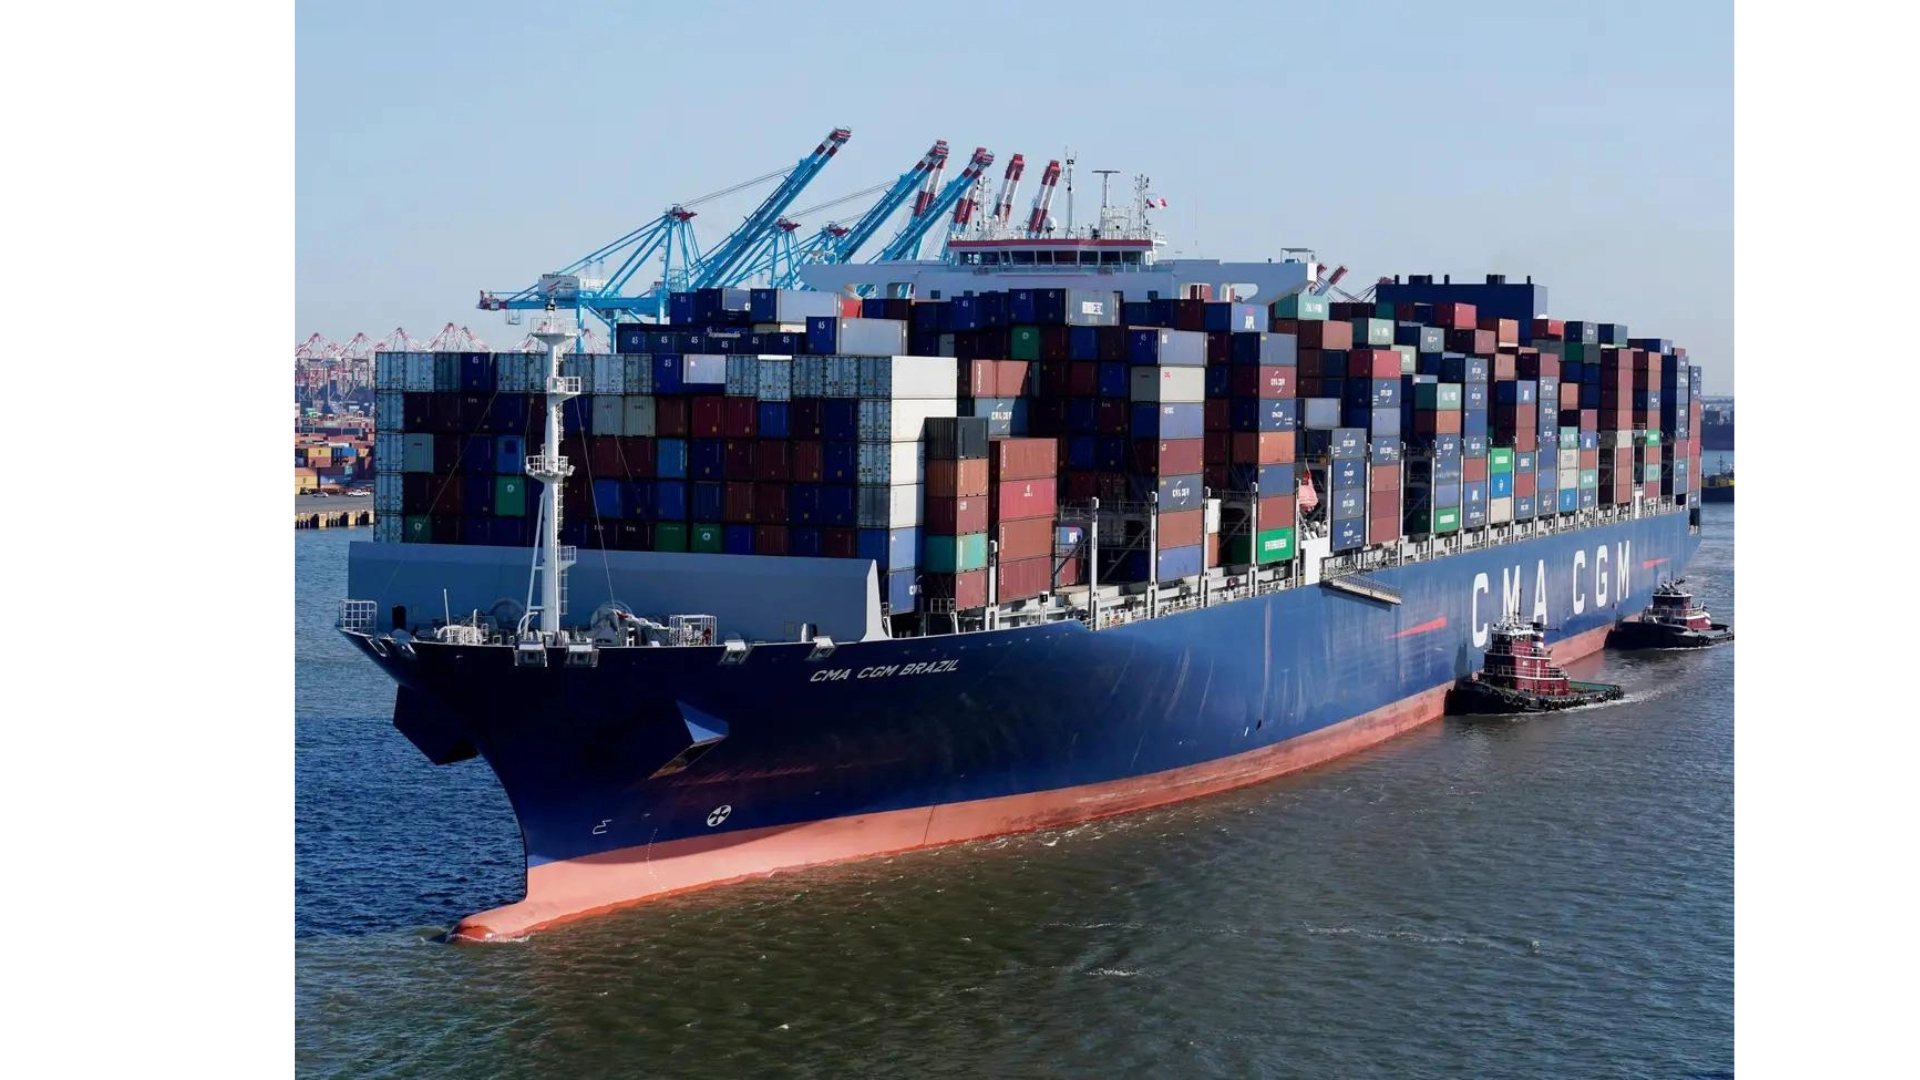 The 'freight recession' rocks global shipping, fueling a 75% plunge in container rates
